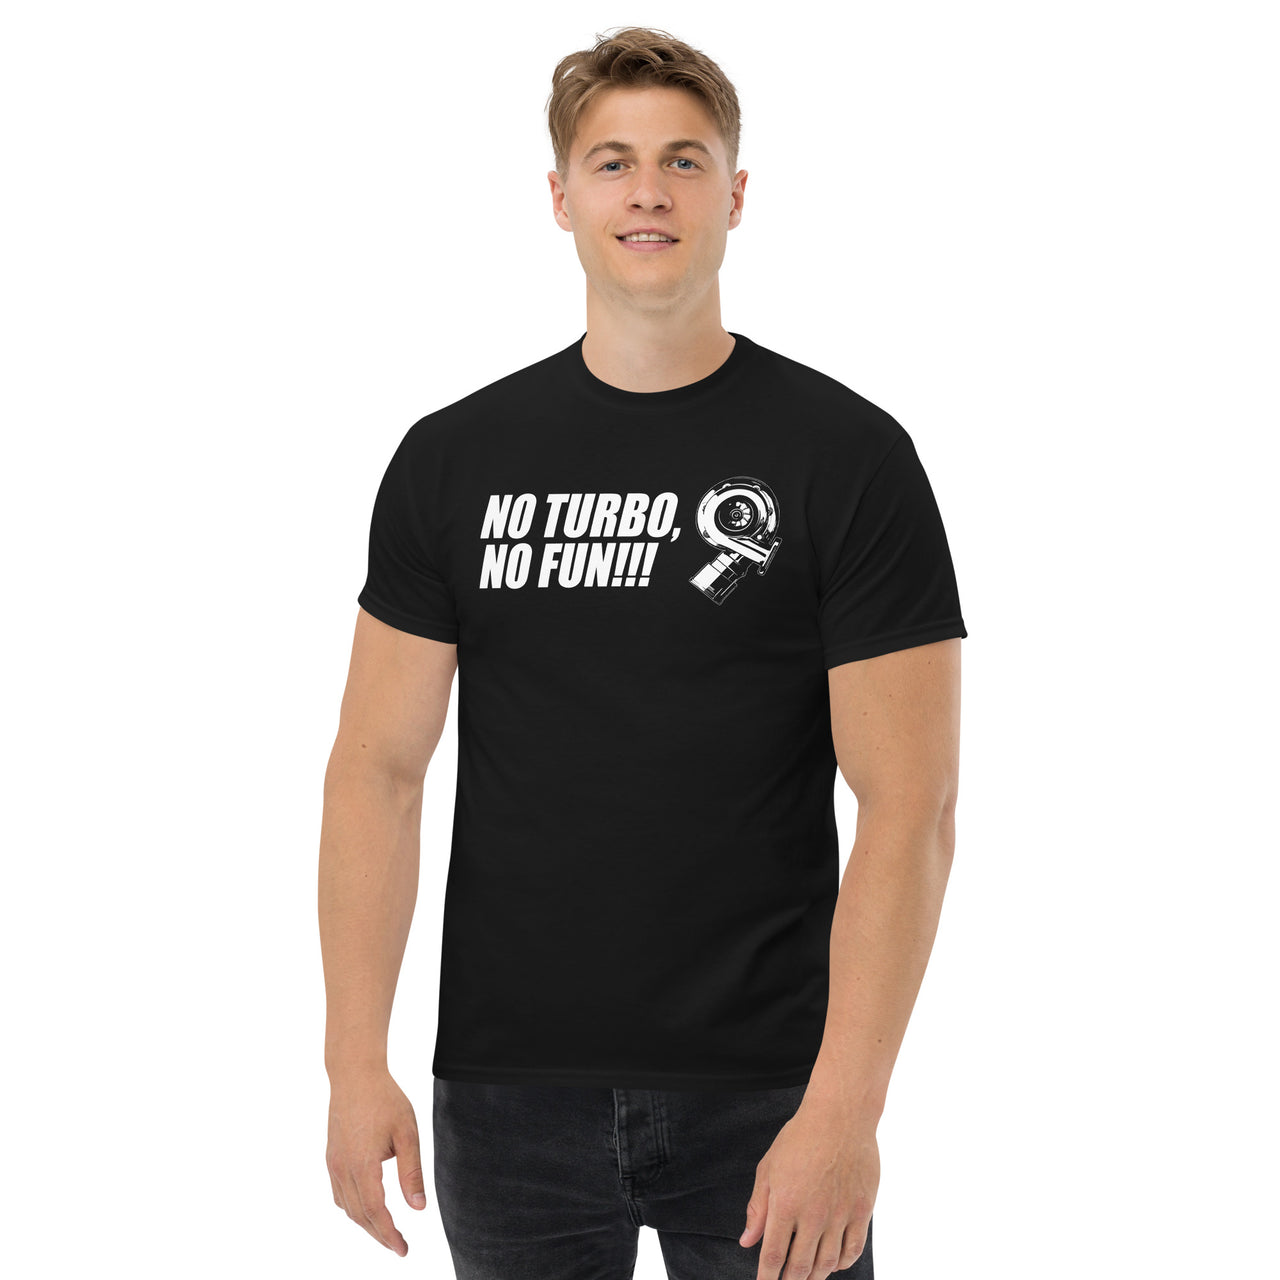 turbo car enthusiasts t-shirt modeled in black